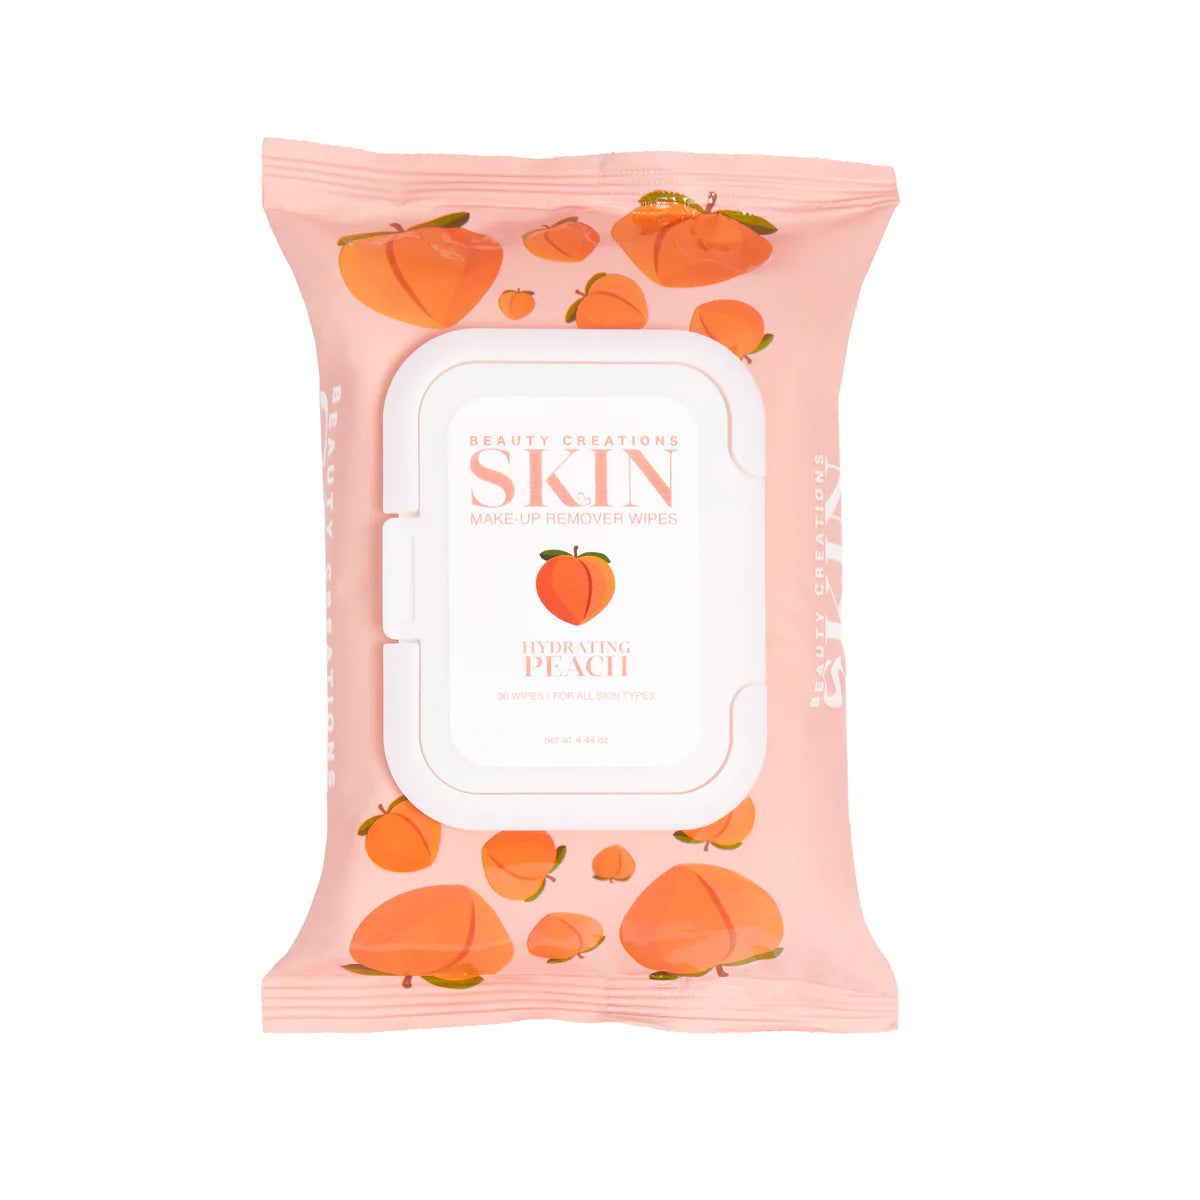 Beauty Creations - Peach Hydrating Makeup Remover Wipes